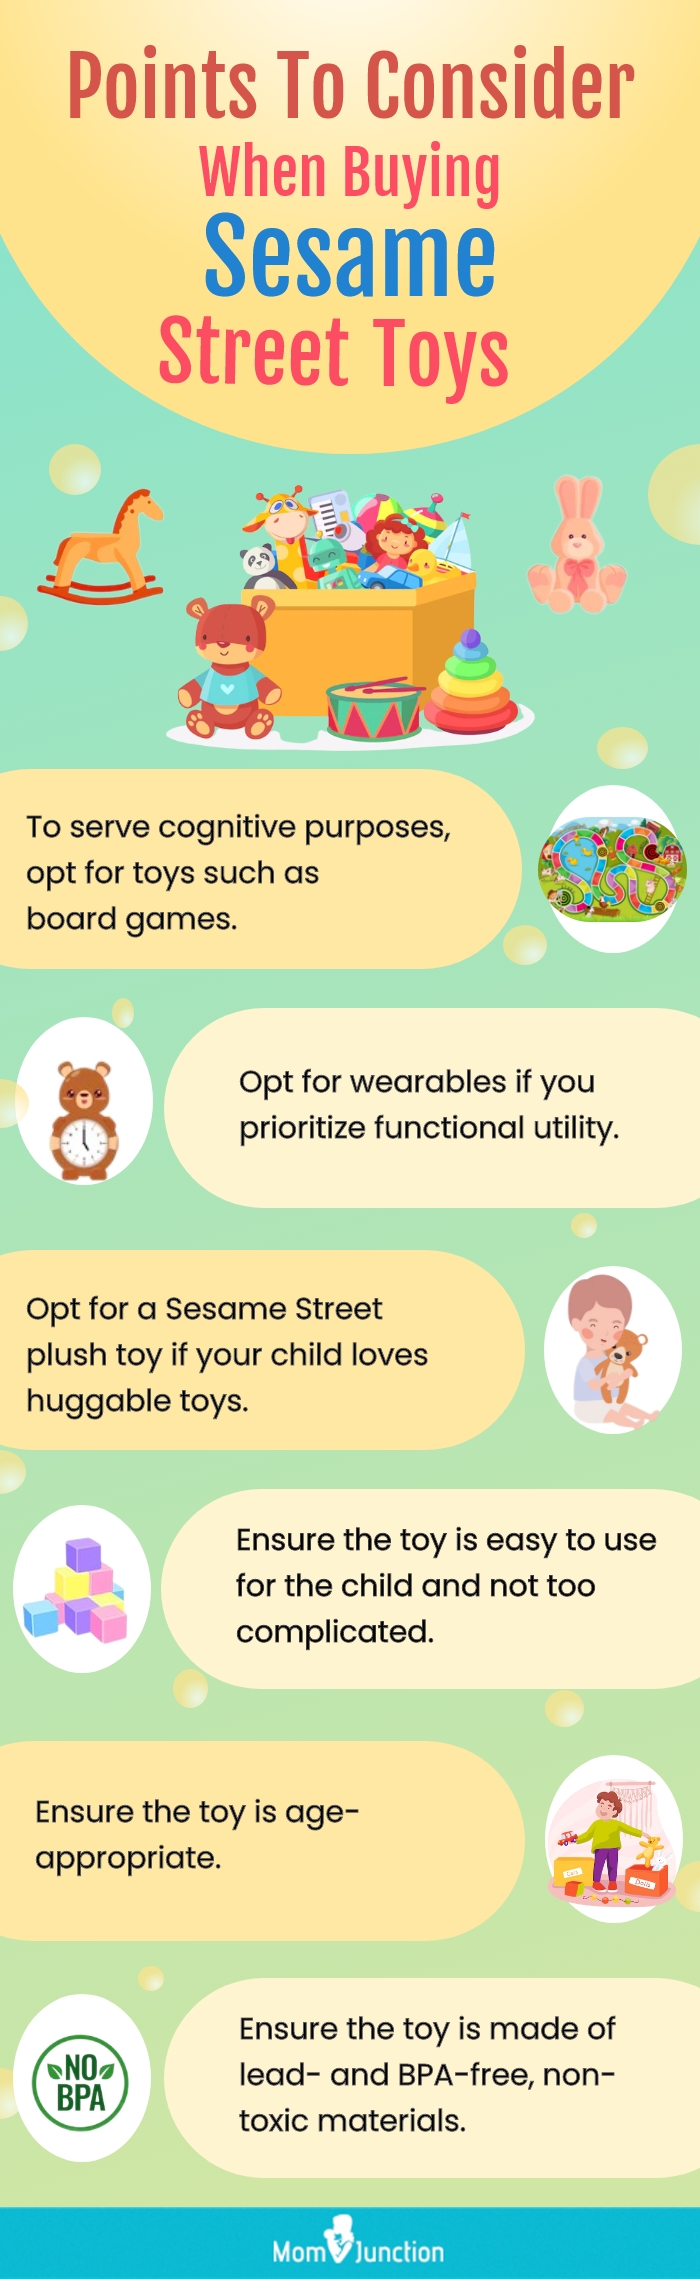 Points To Consider When Buying Sesame Street Toys